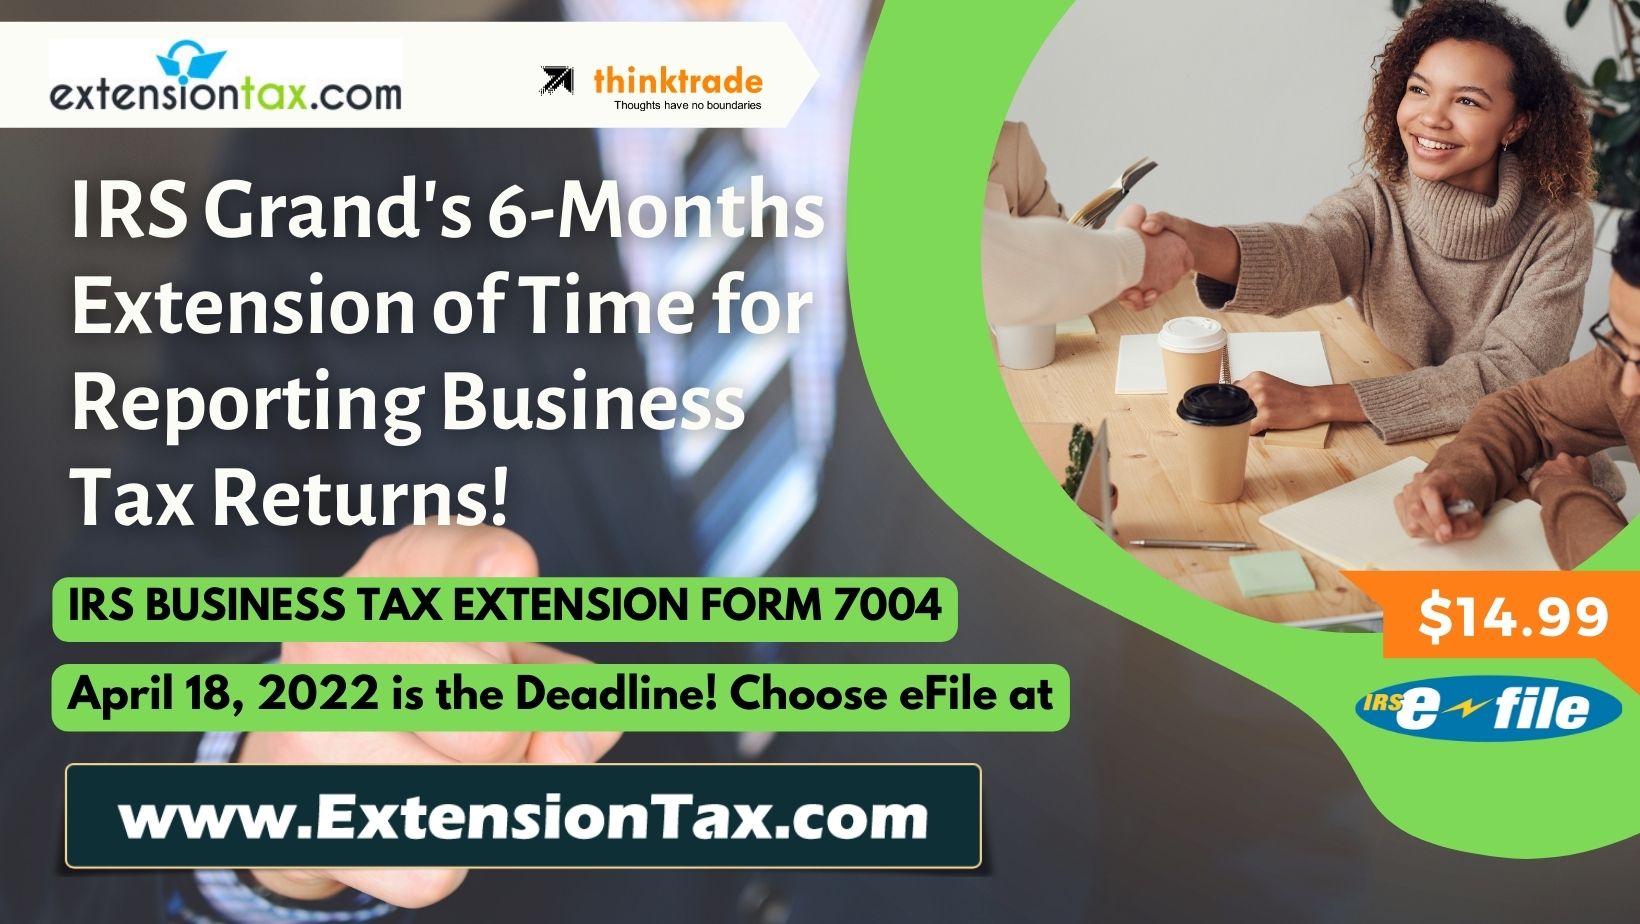 April 18 Due Date for Extension Tax Form 7004 and Form 4868